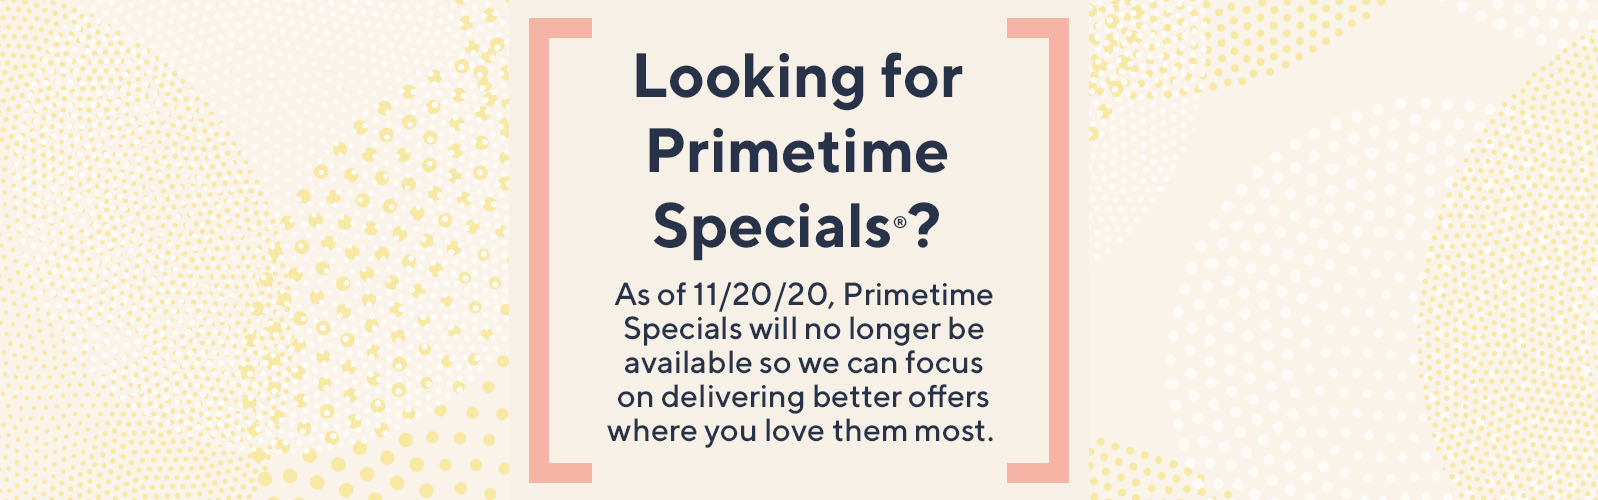 Looking for Primetime Specials®?  As of 11/20/20, Primetime Specials will no longer be available so we can focus on delivering better offers where you love them most. 